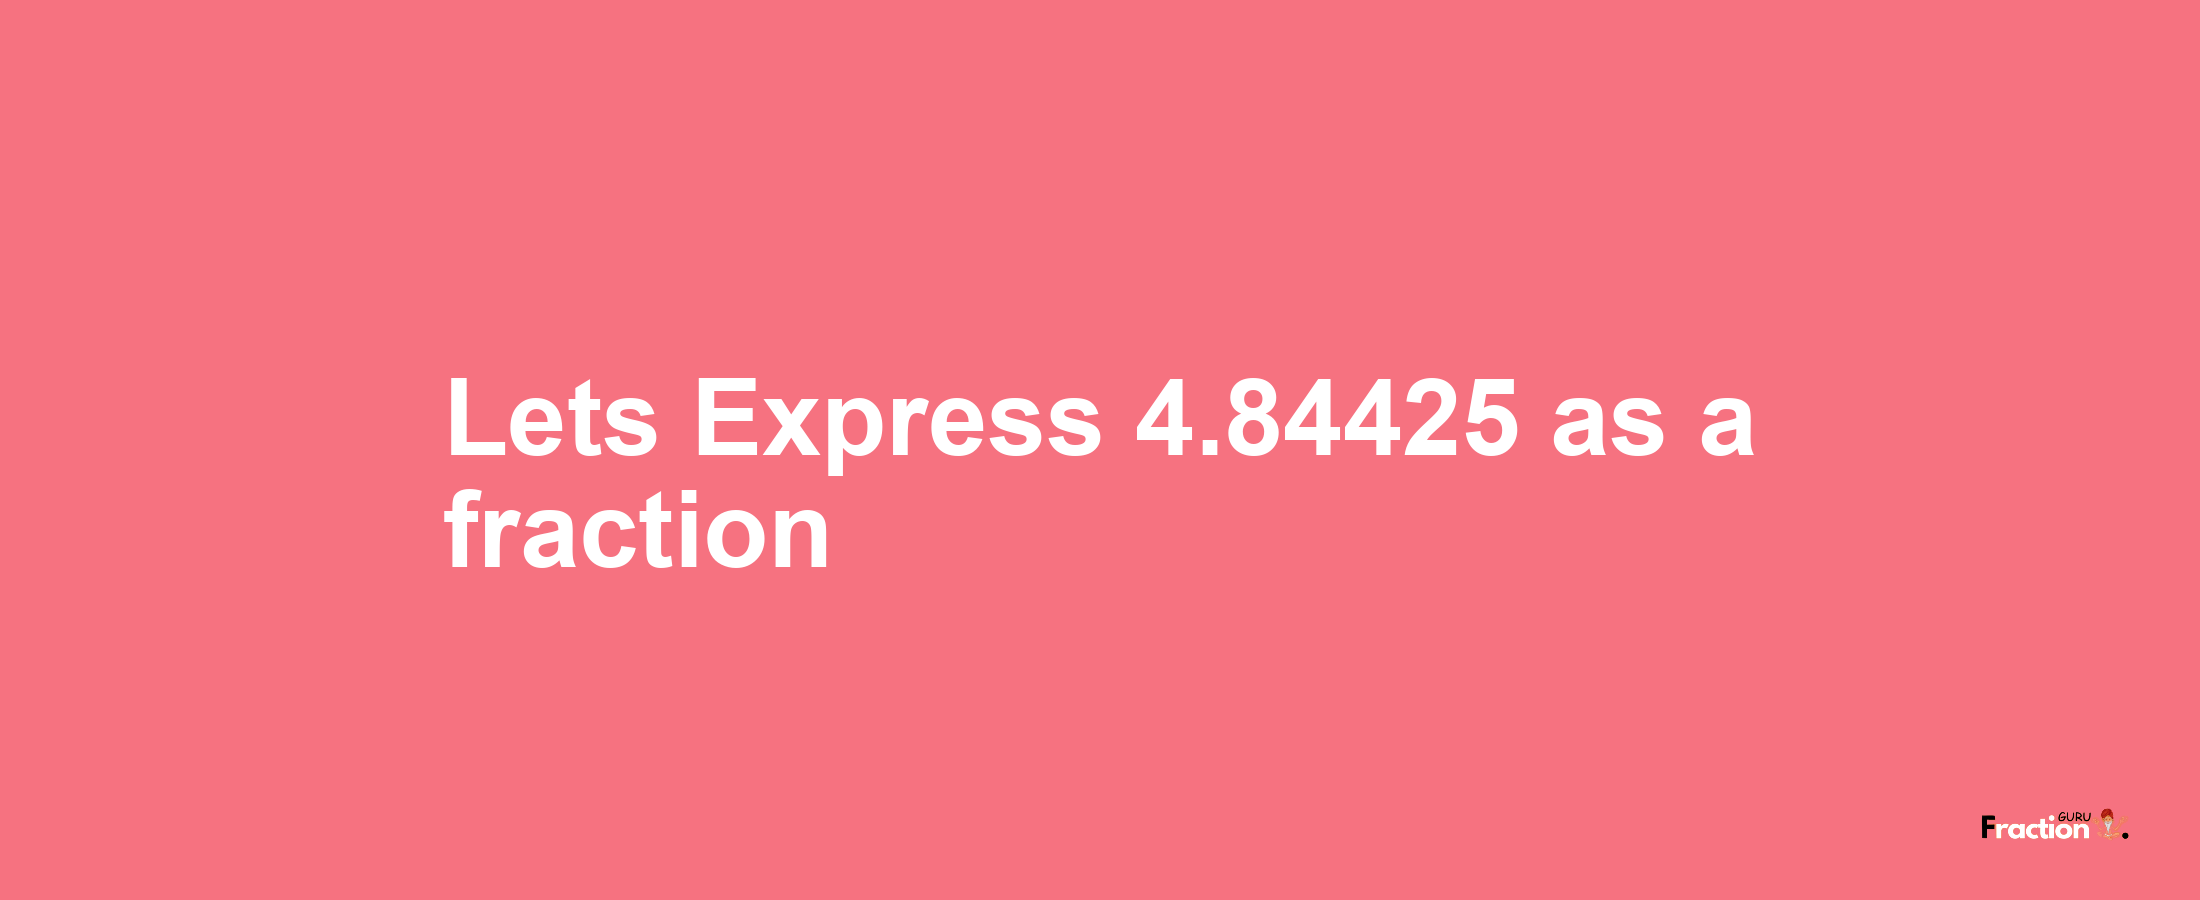 Lets Express 4.84425 as afraction